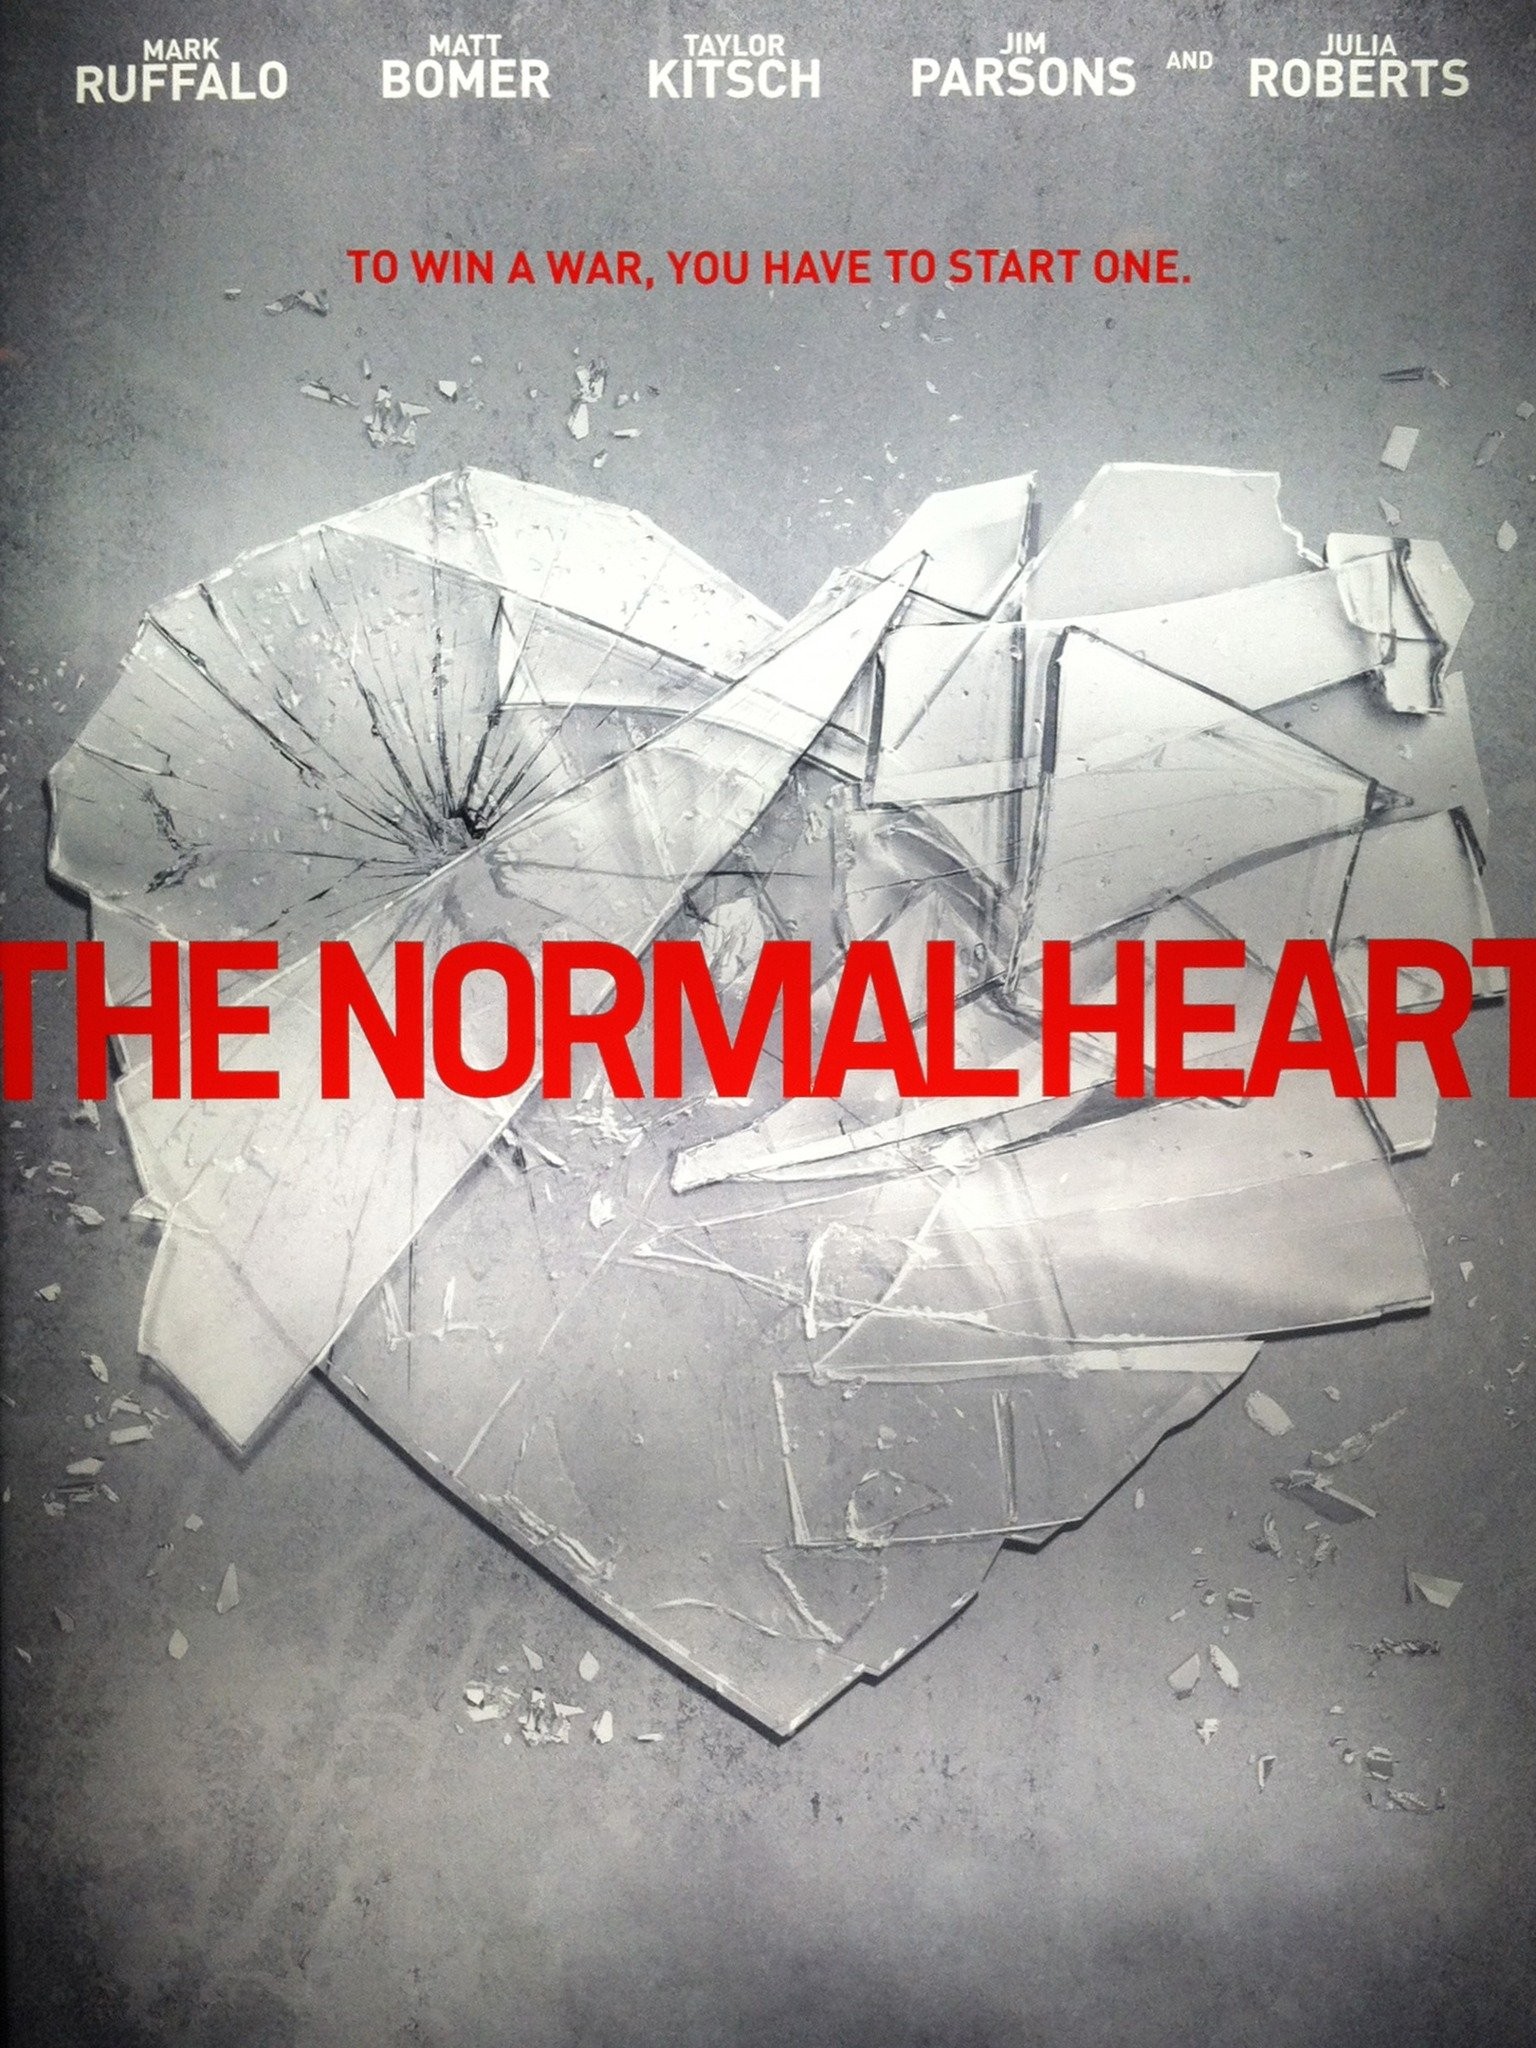 the normal heart hbo poster